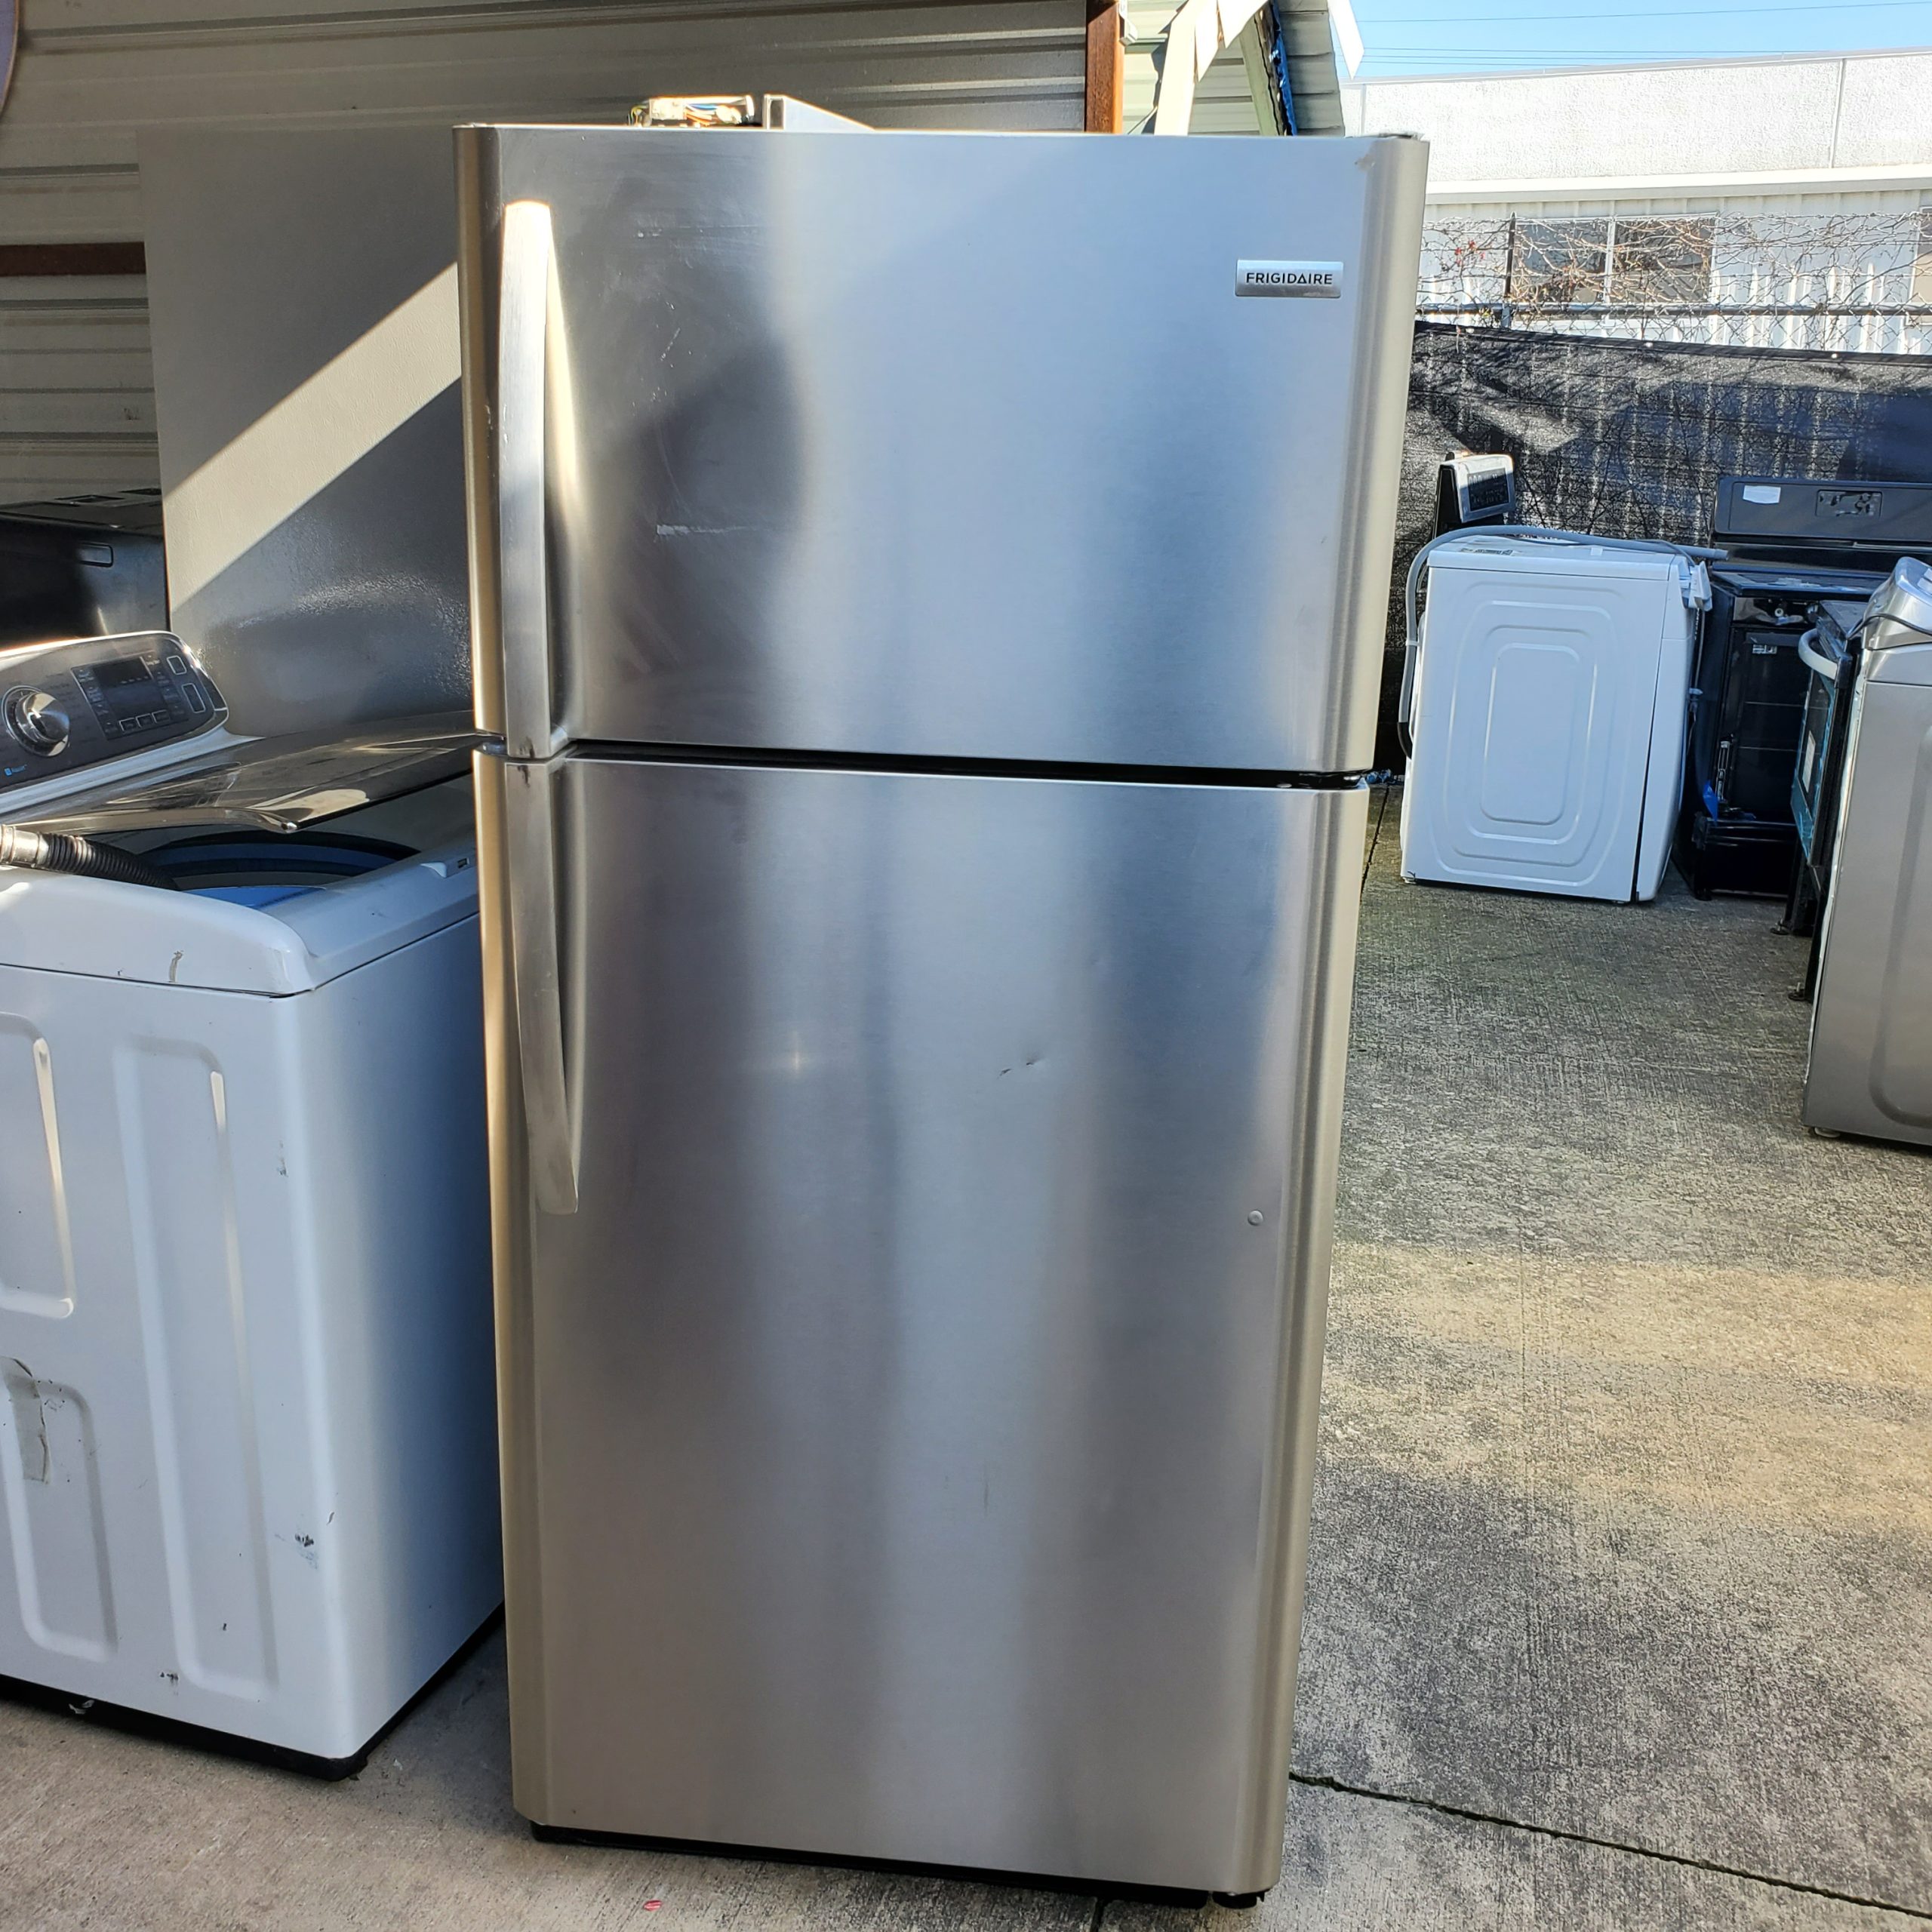 example picture of A Frigidaire stainless steel top and bottom refrigerator in our Salvage appliance program.